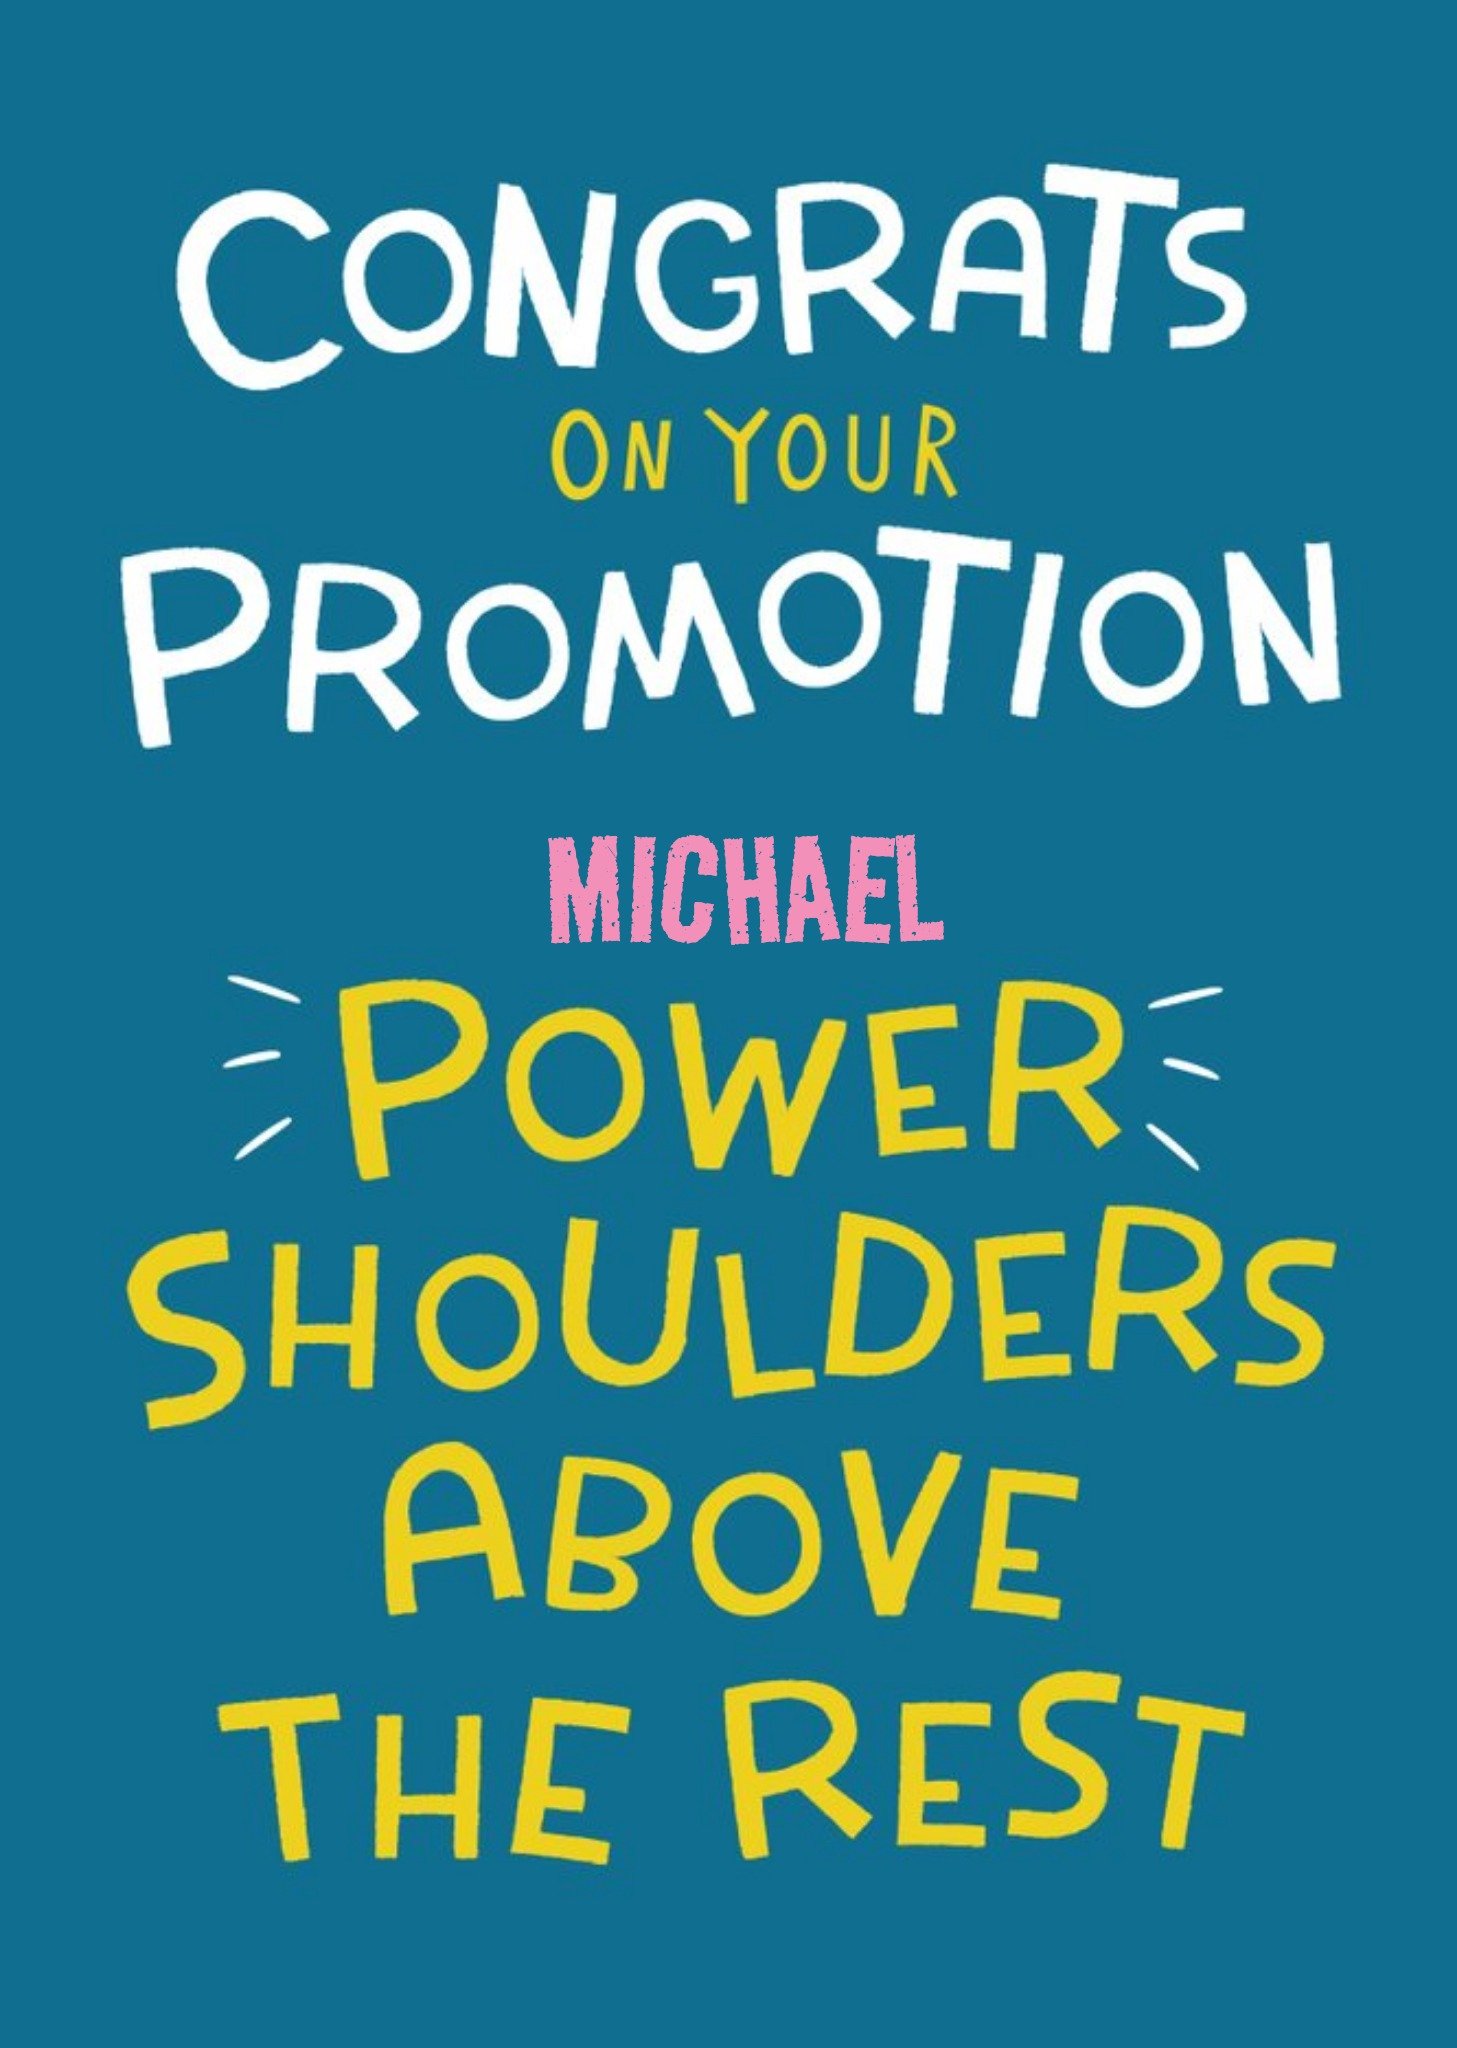 Moonpig Illustrated Typographic Congrats On Your Promotion Card Ecard